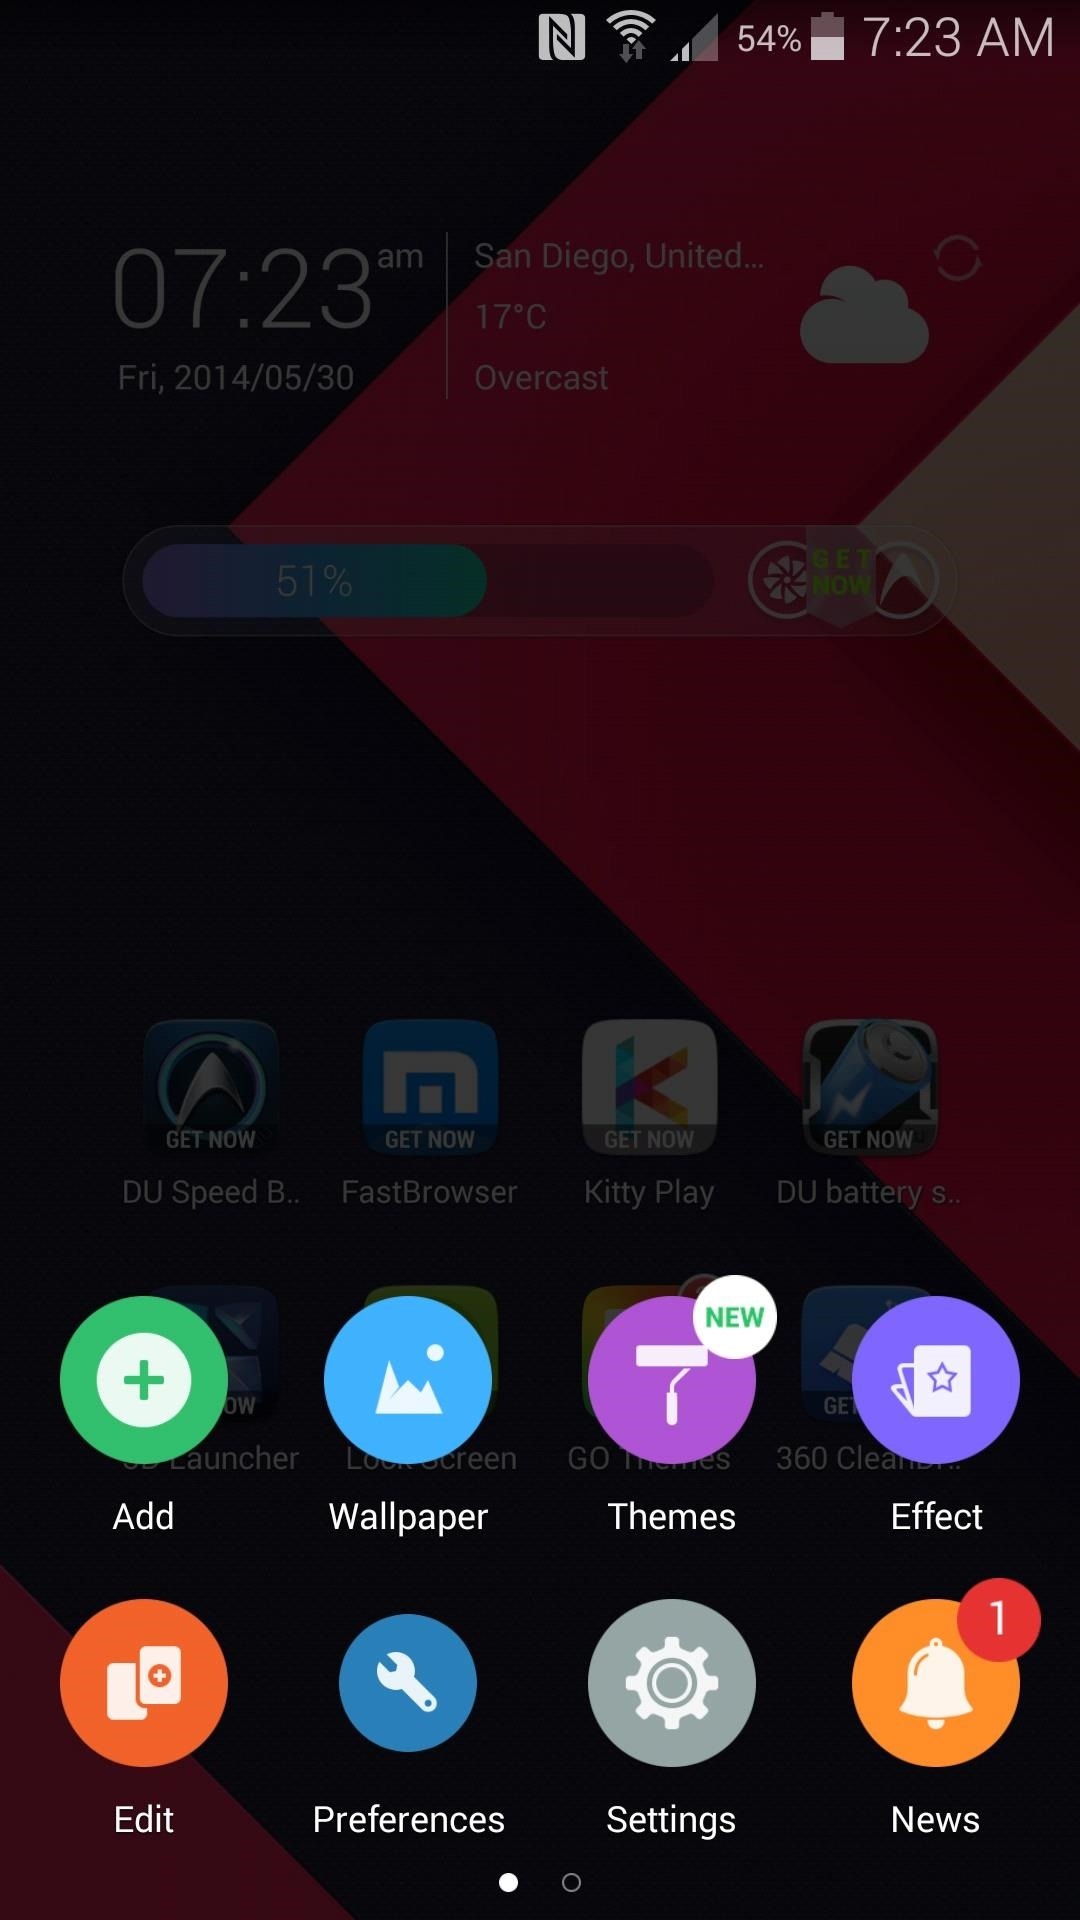 Immensely Popular Go Launcher Gets Big Update & Offers Free Prime Until June 1st